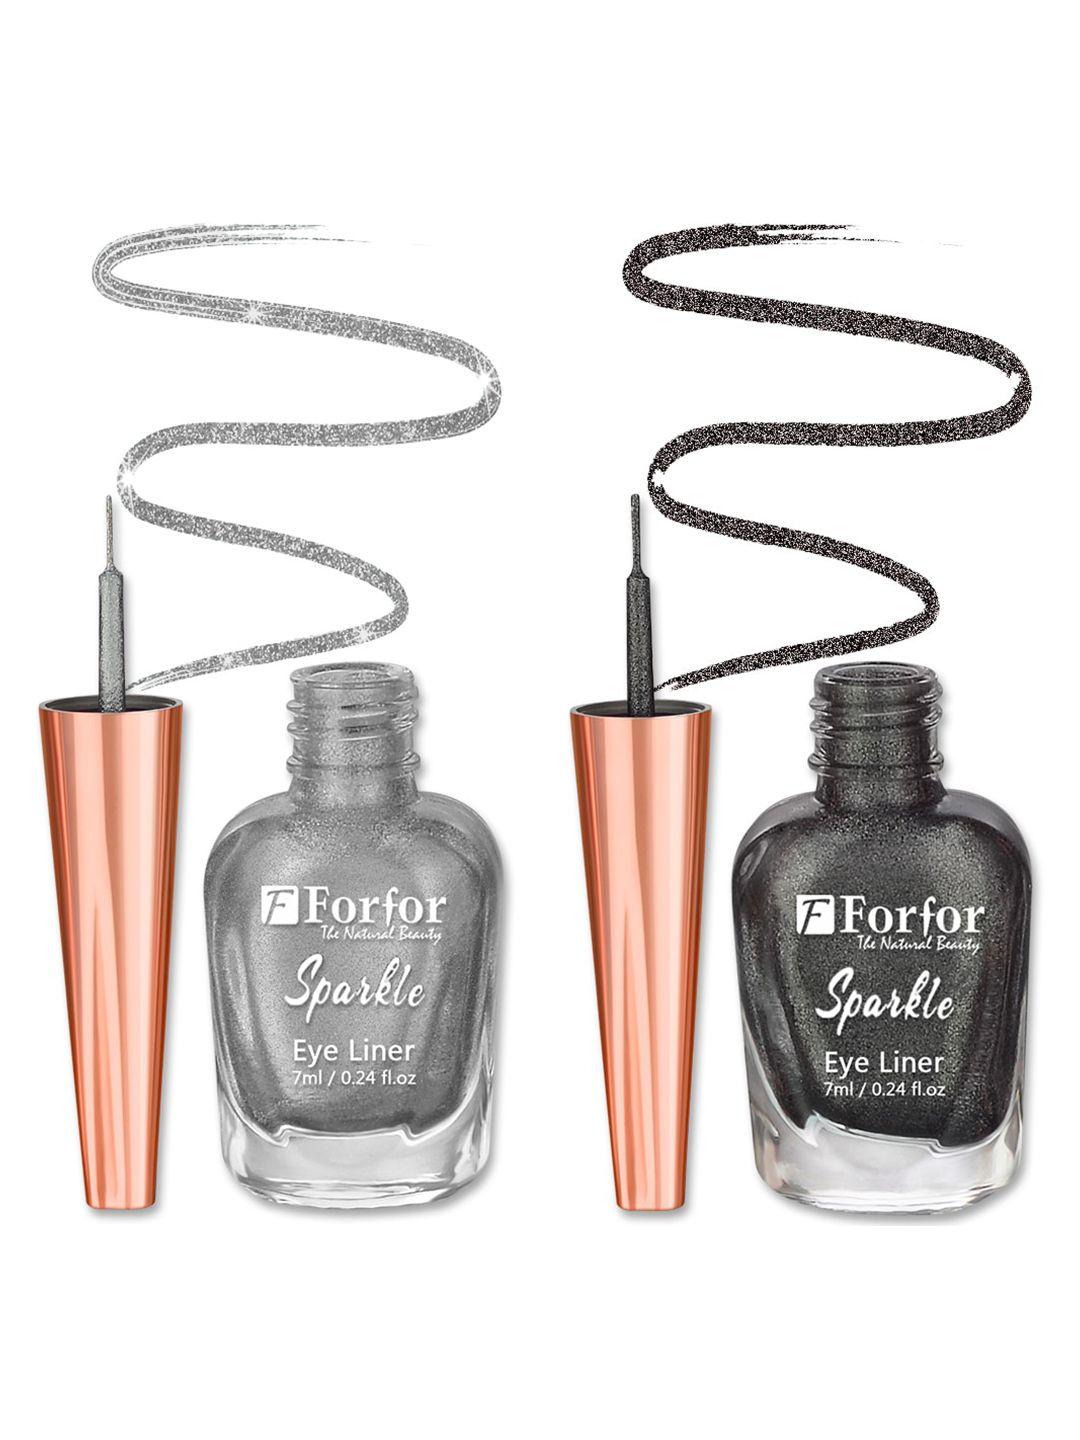 forfor sparkle set of 2 liquid glitter eyeliners 7 ml each - grey 02 & silver 05